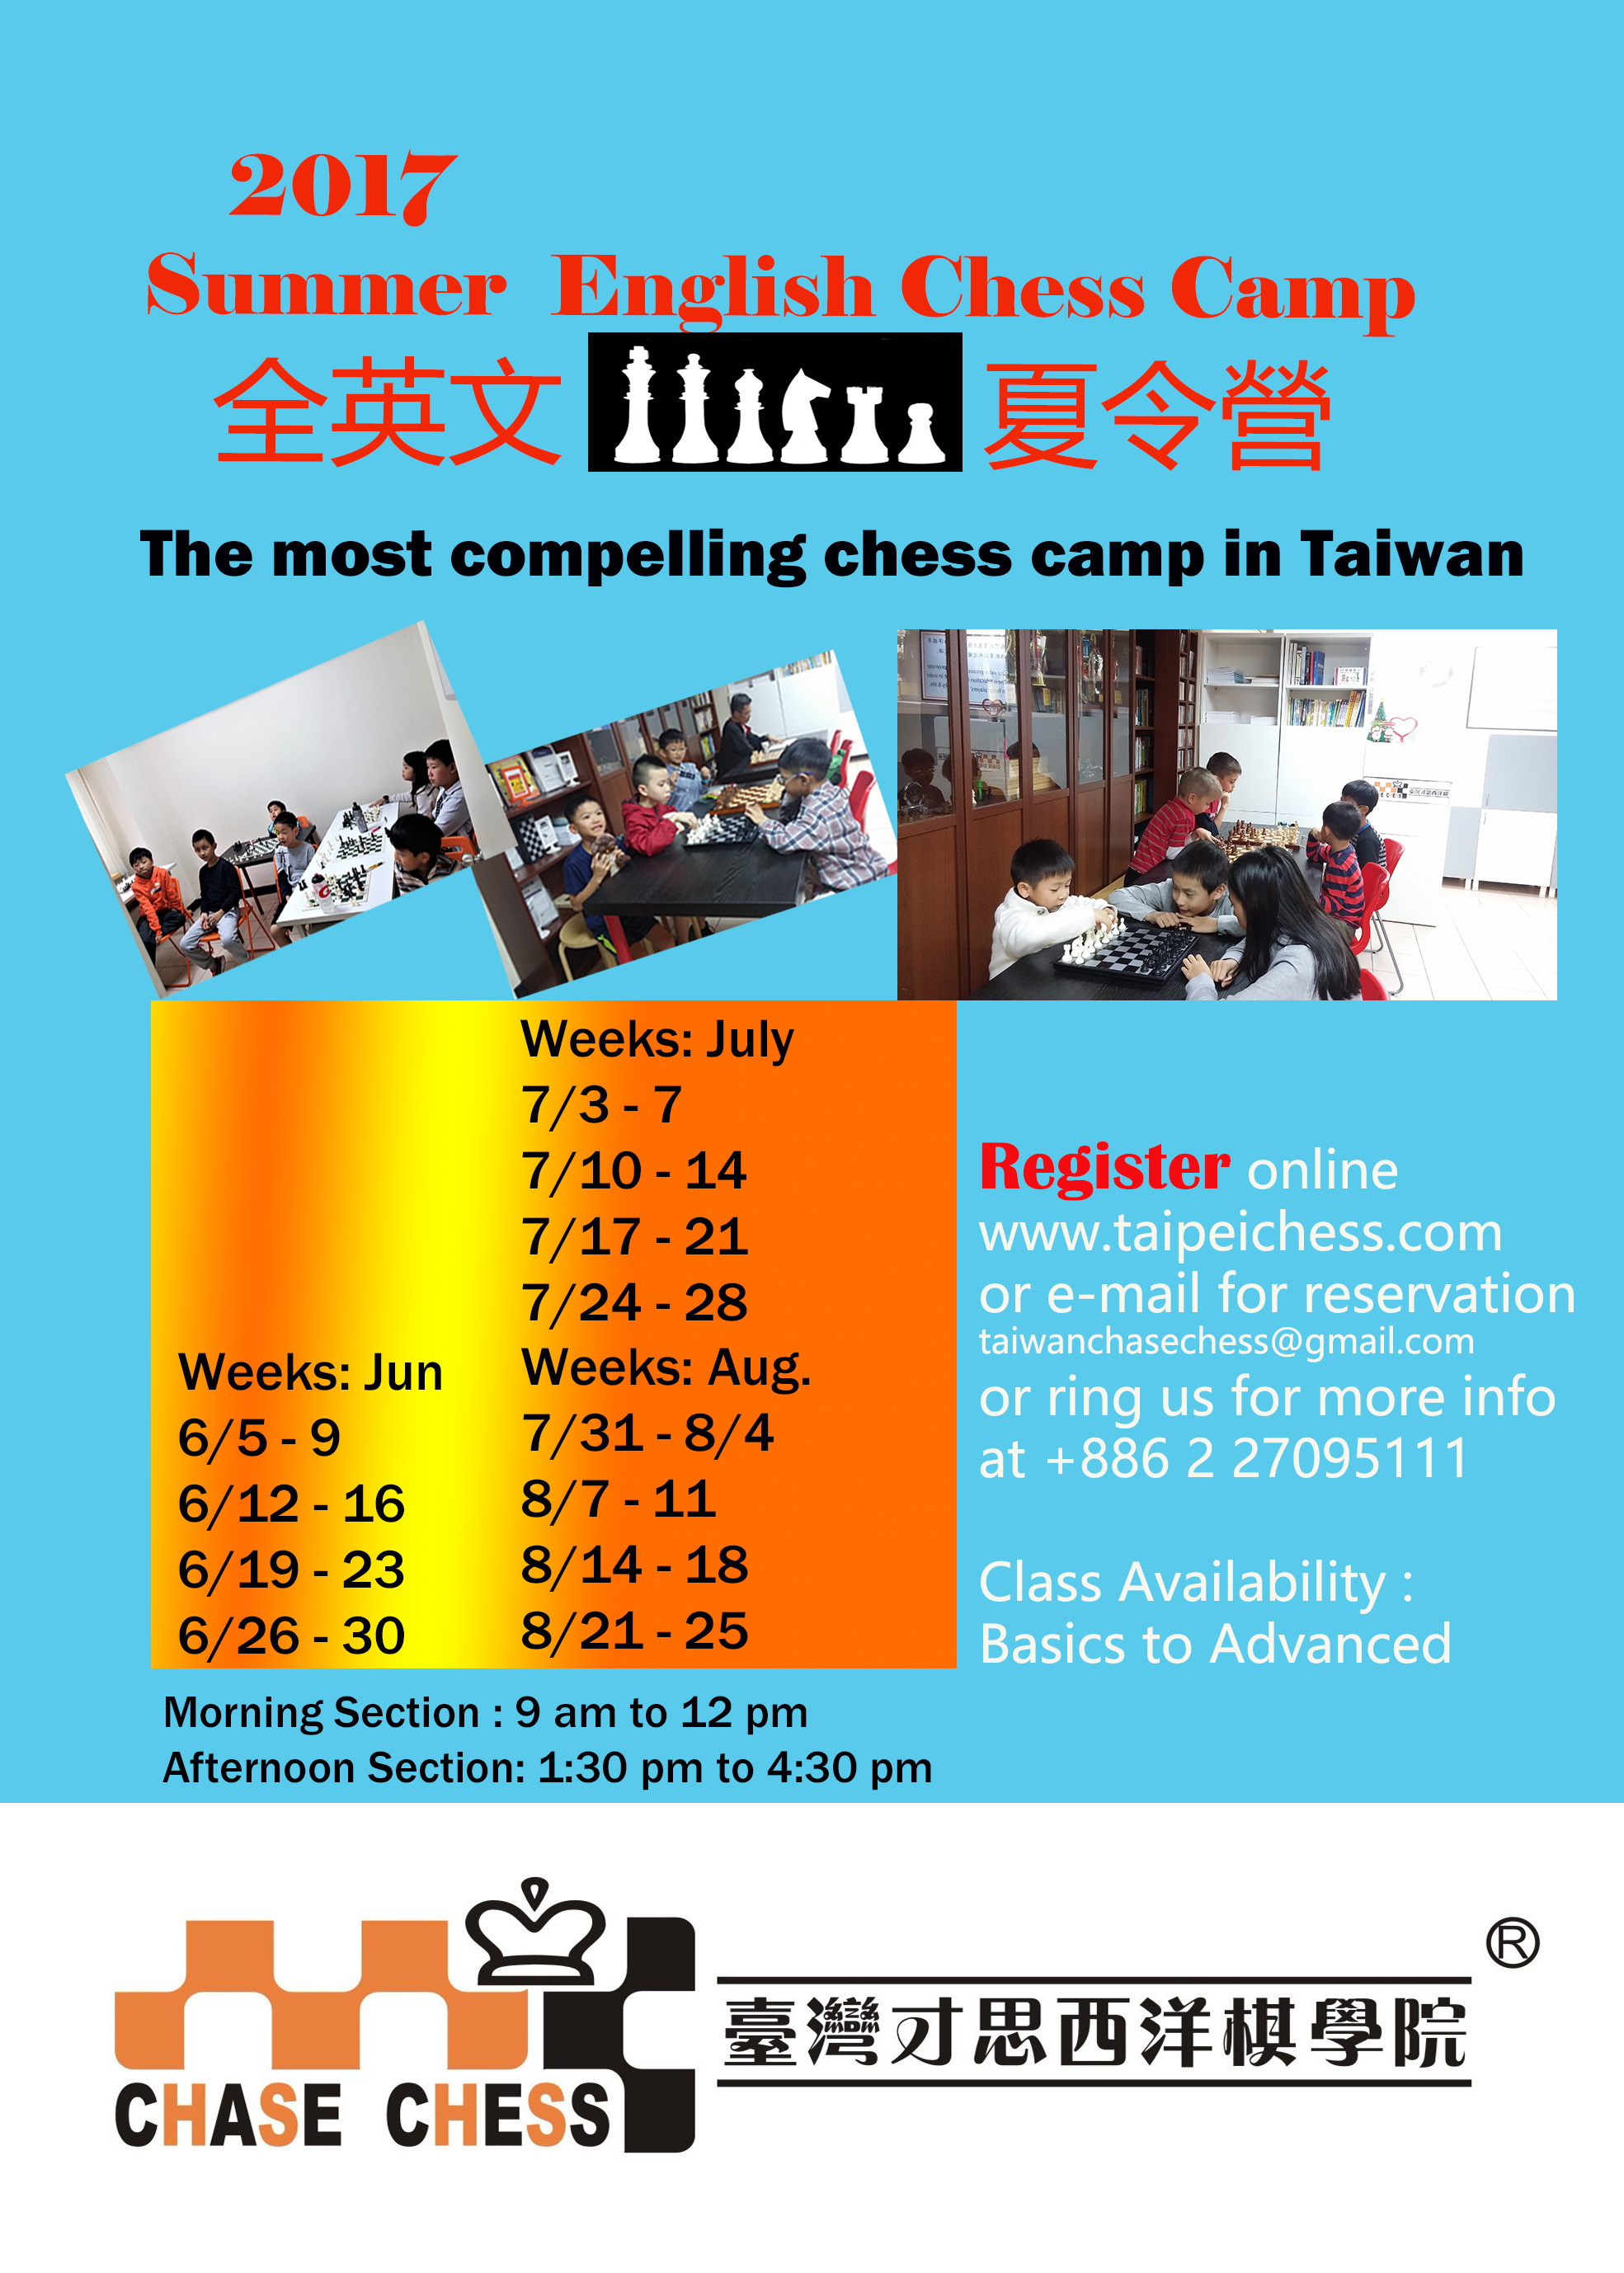 We kicked off 2017 chess camp on Jun 5th